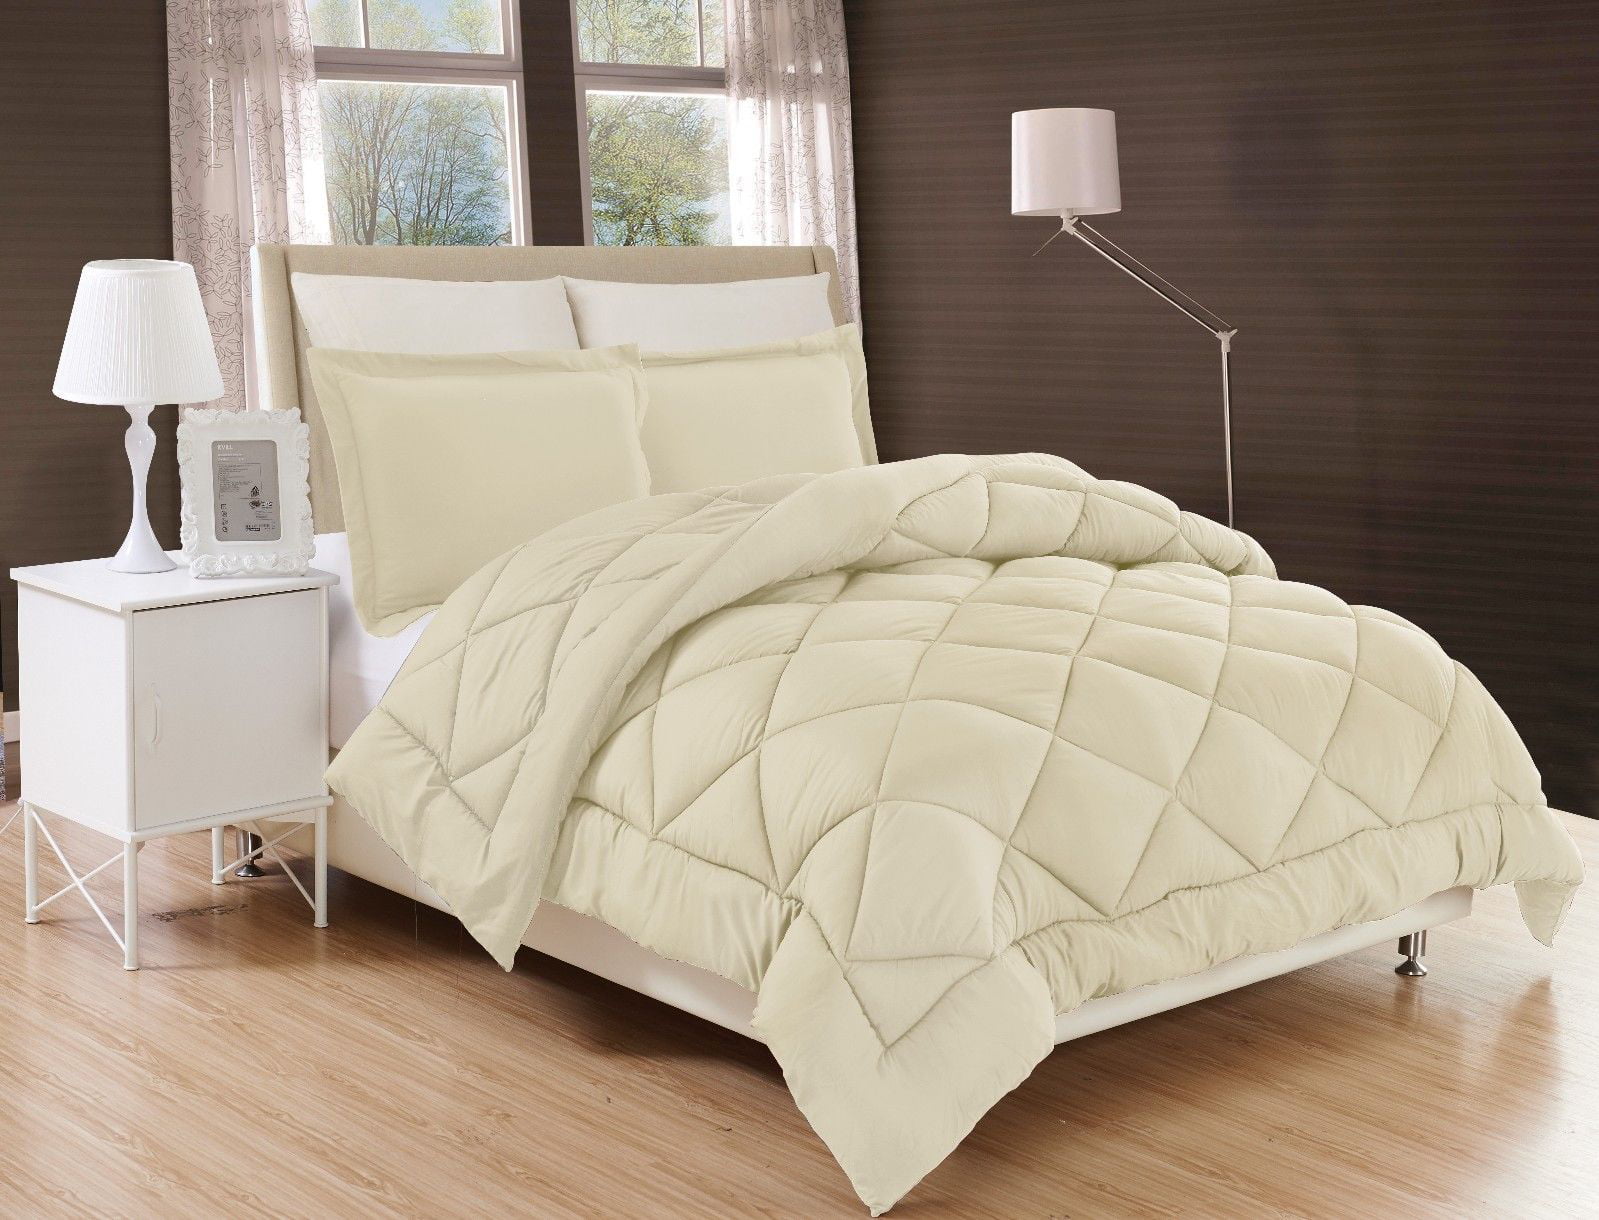 Taupe Beige Down Alternative Diamond Comforter Bed Cover